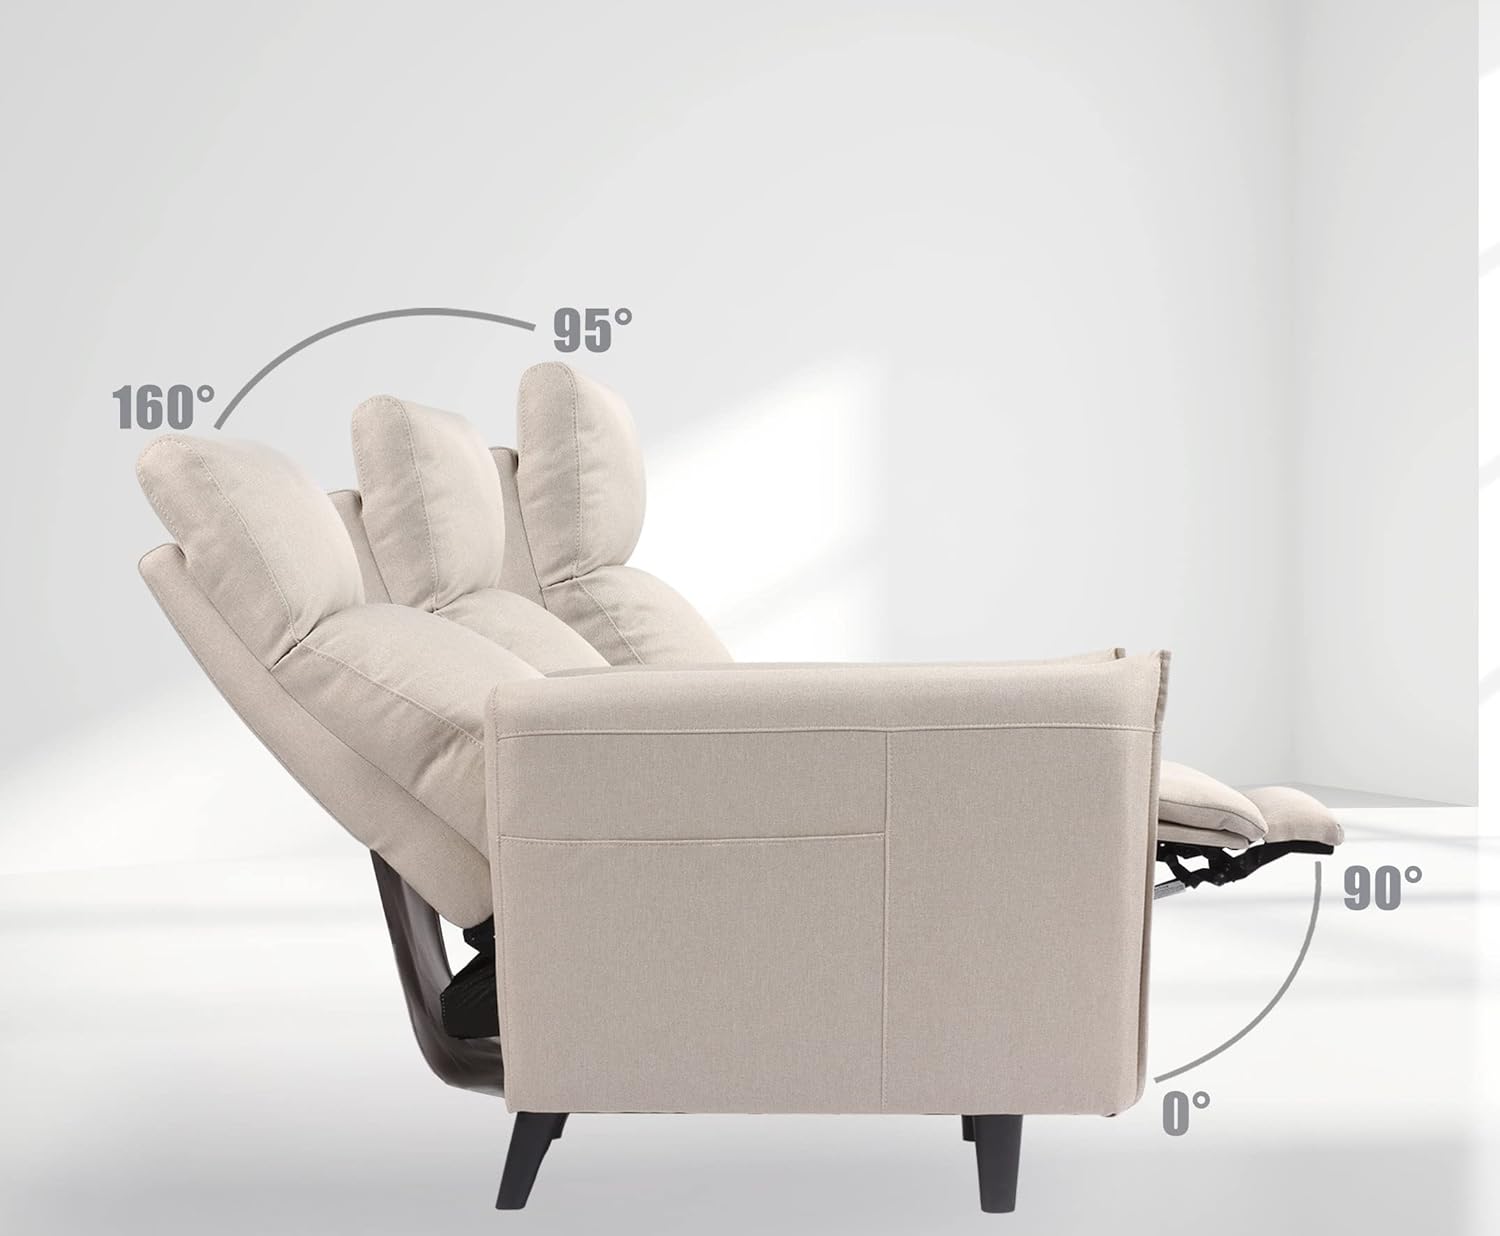 Olimix Recliner High Back Chair positions